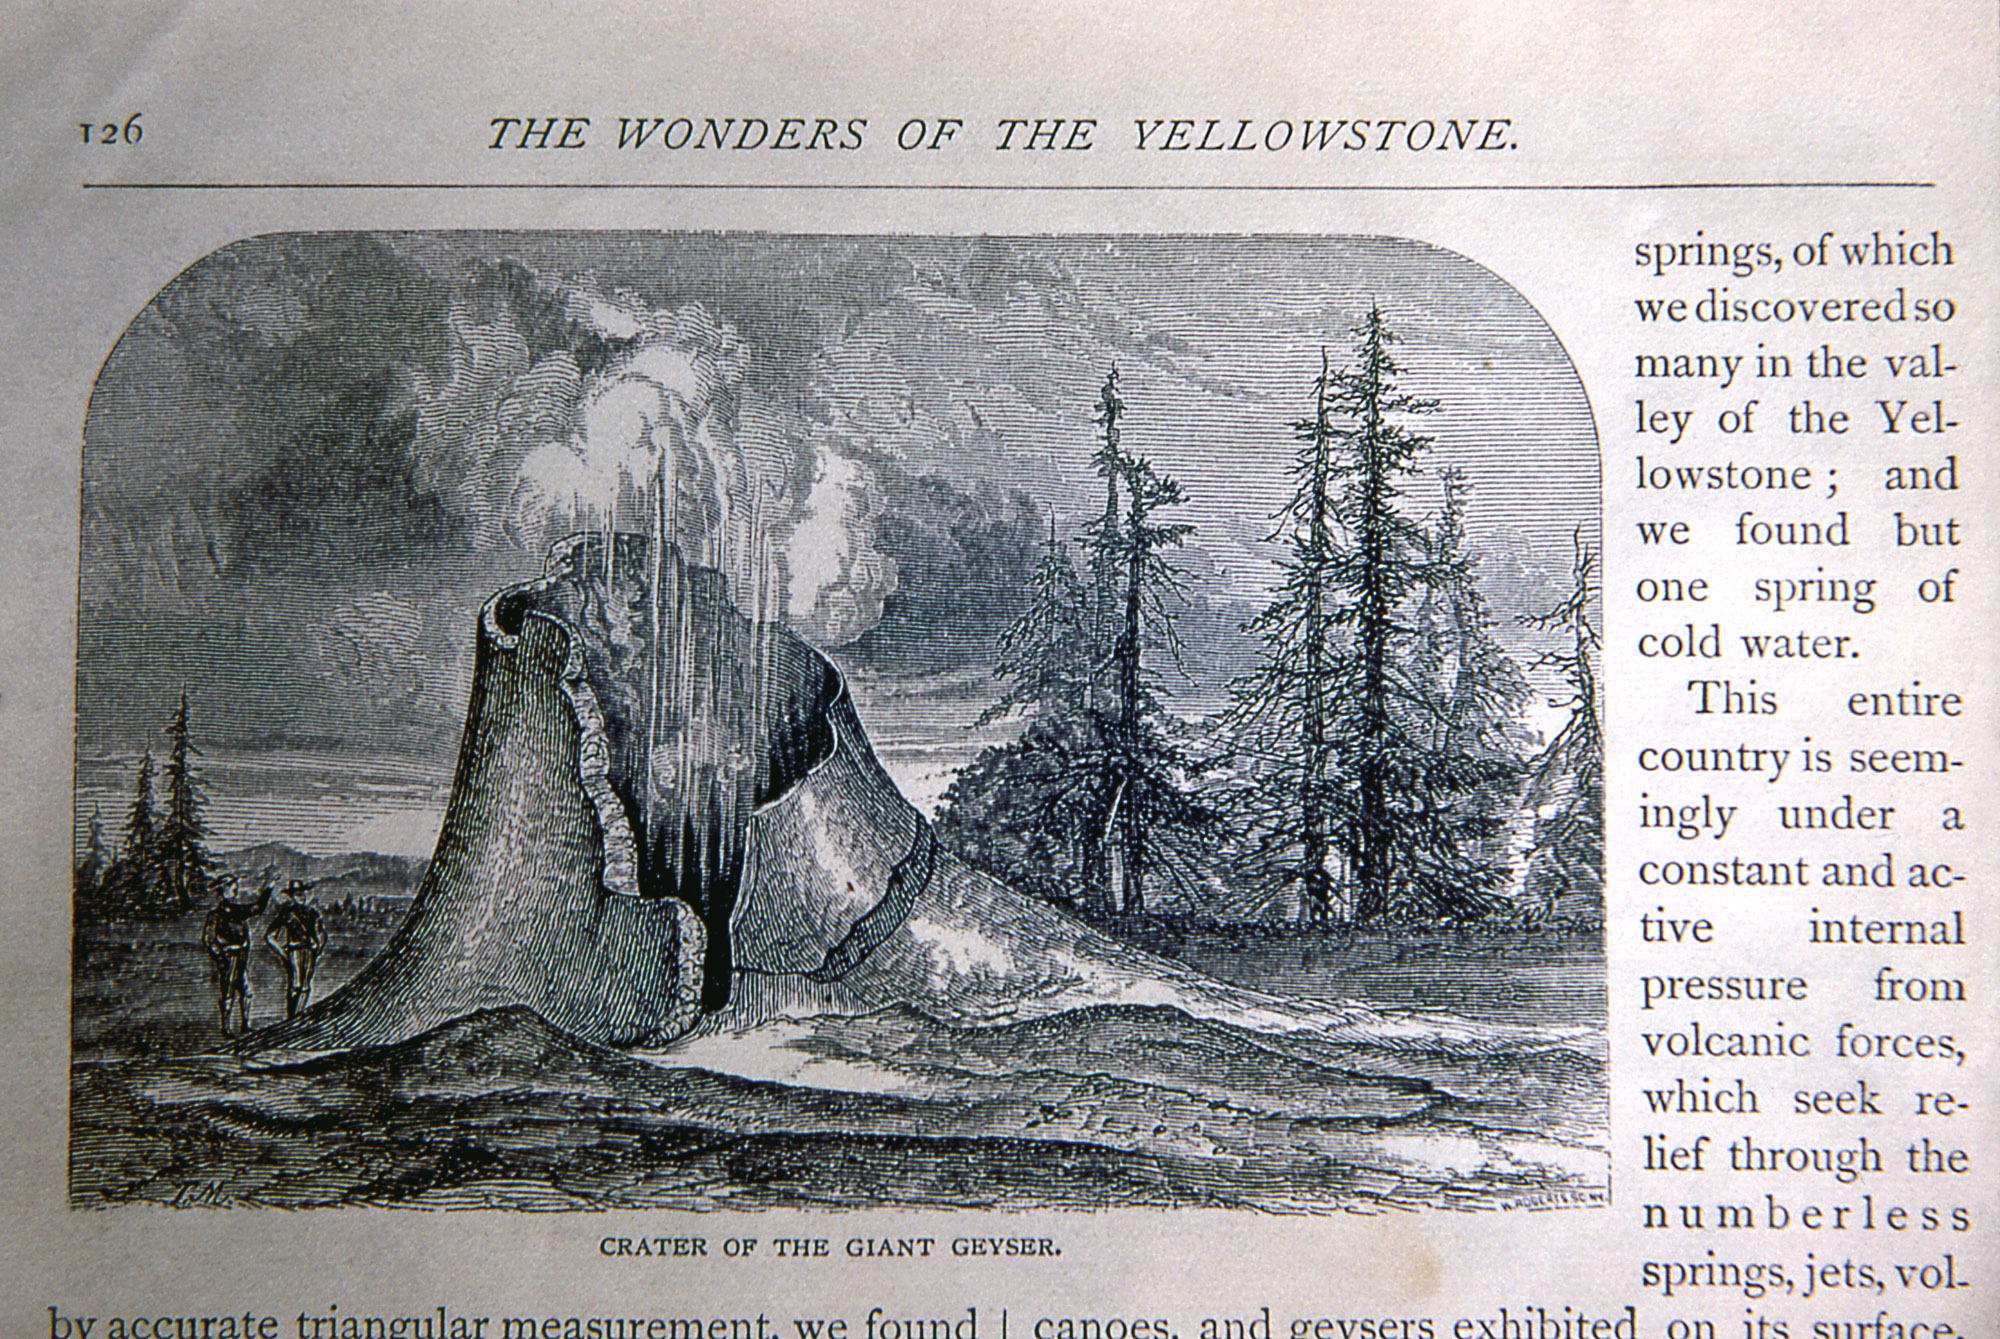 "Crater of the Giant Geyser", illustration from "The Wonders of the Yellowstone"; NP Langford; May/June 1871 issue of Scribner's Monthly